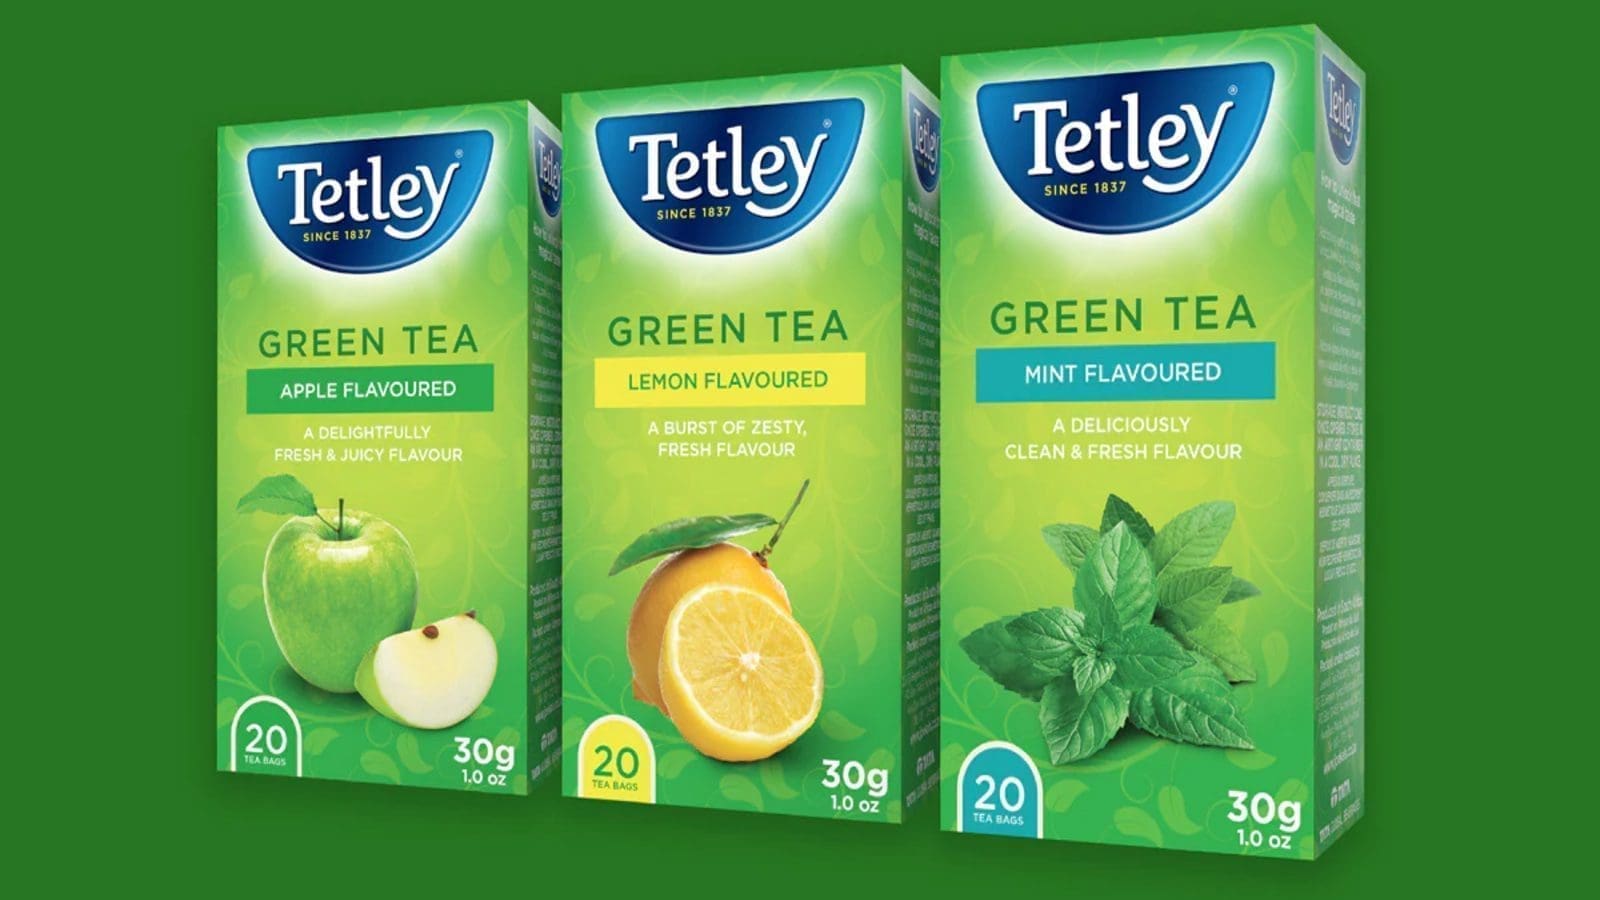 Tata Consumer Products bolsters its fast-growing green tea portfolio under Tetley brand with new flavor